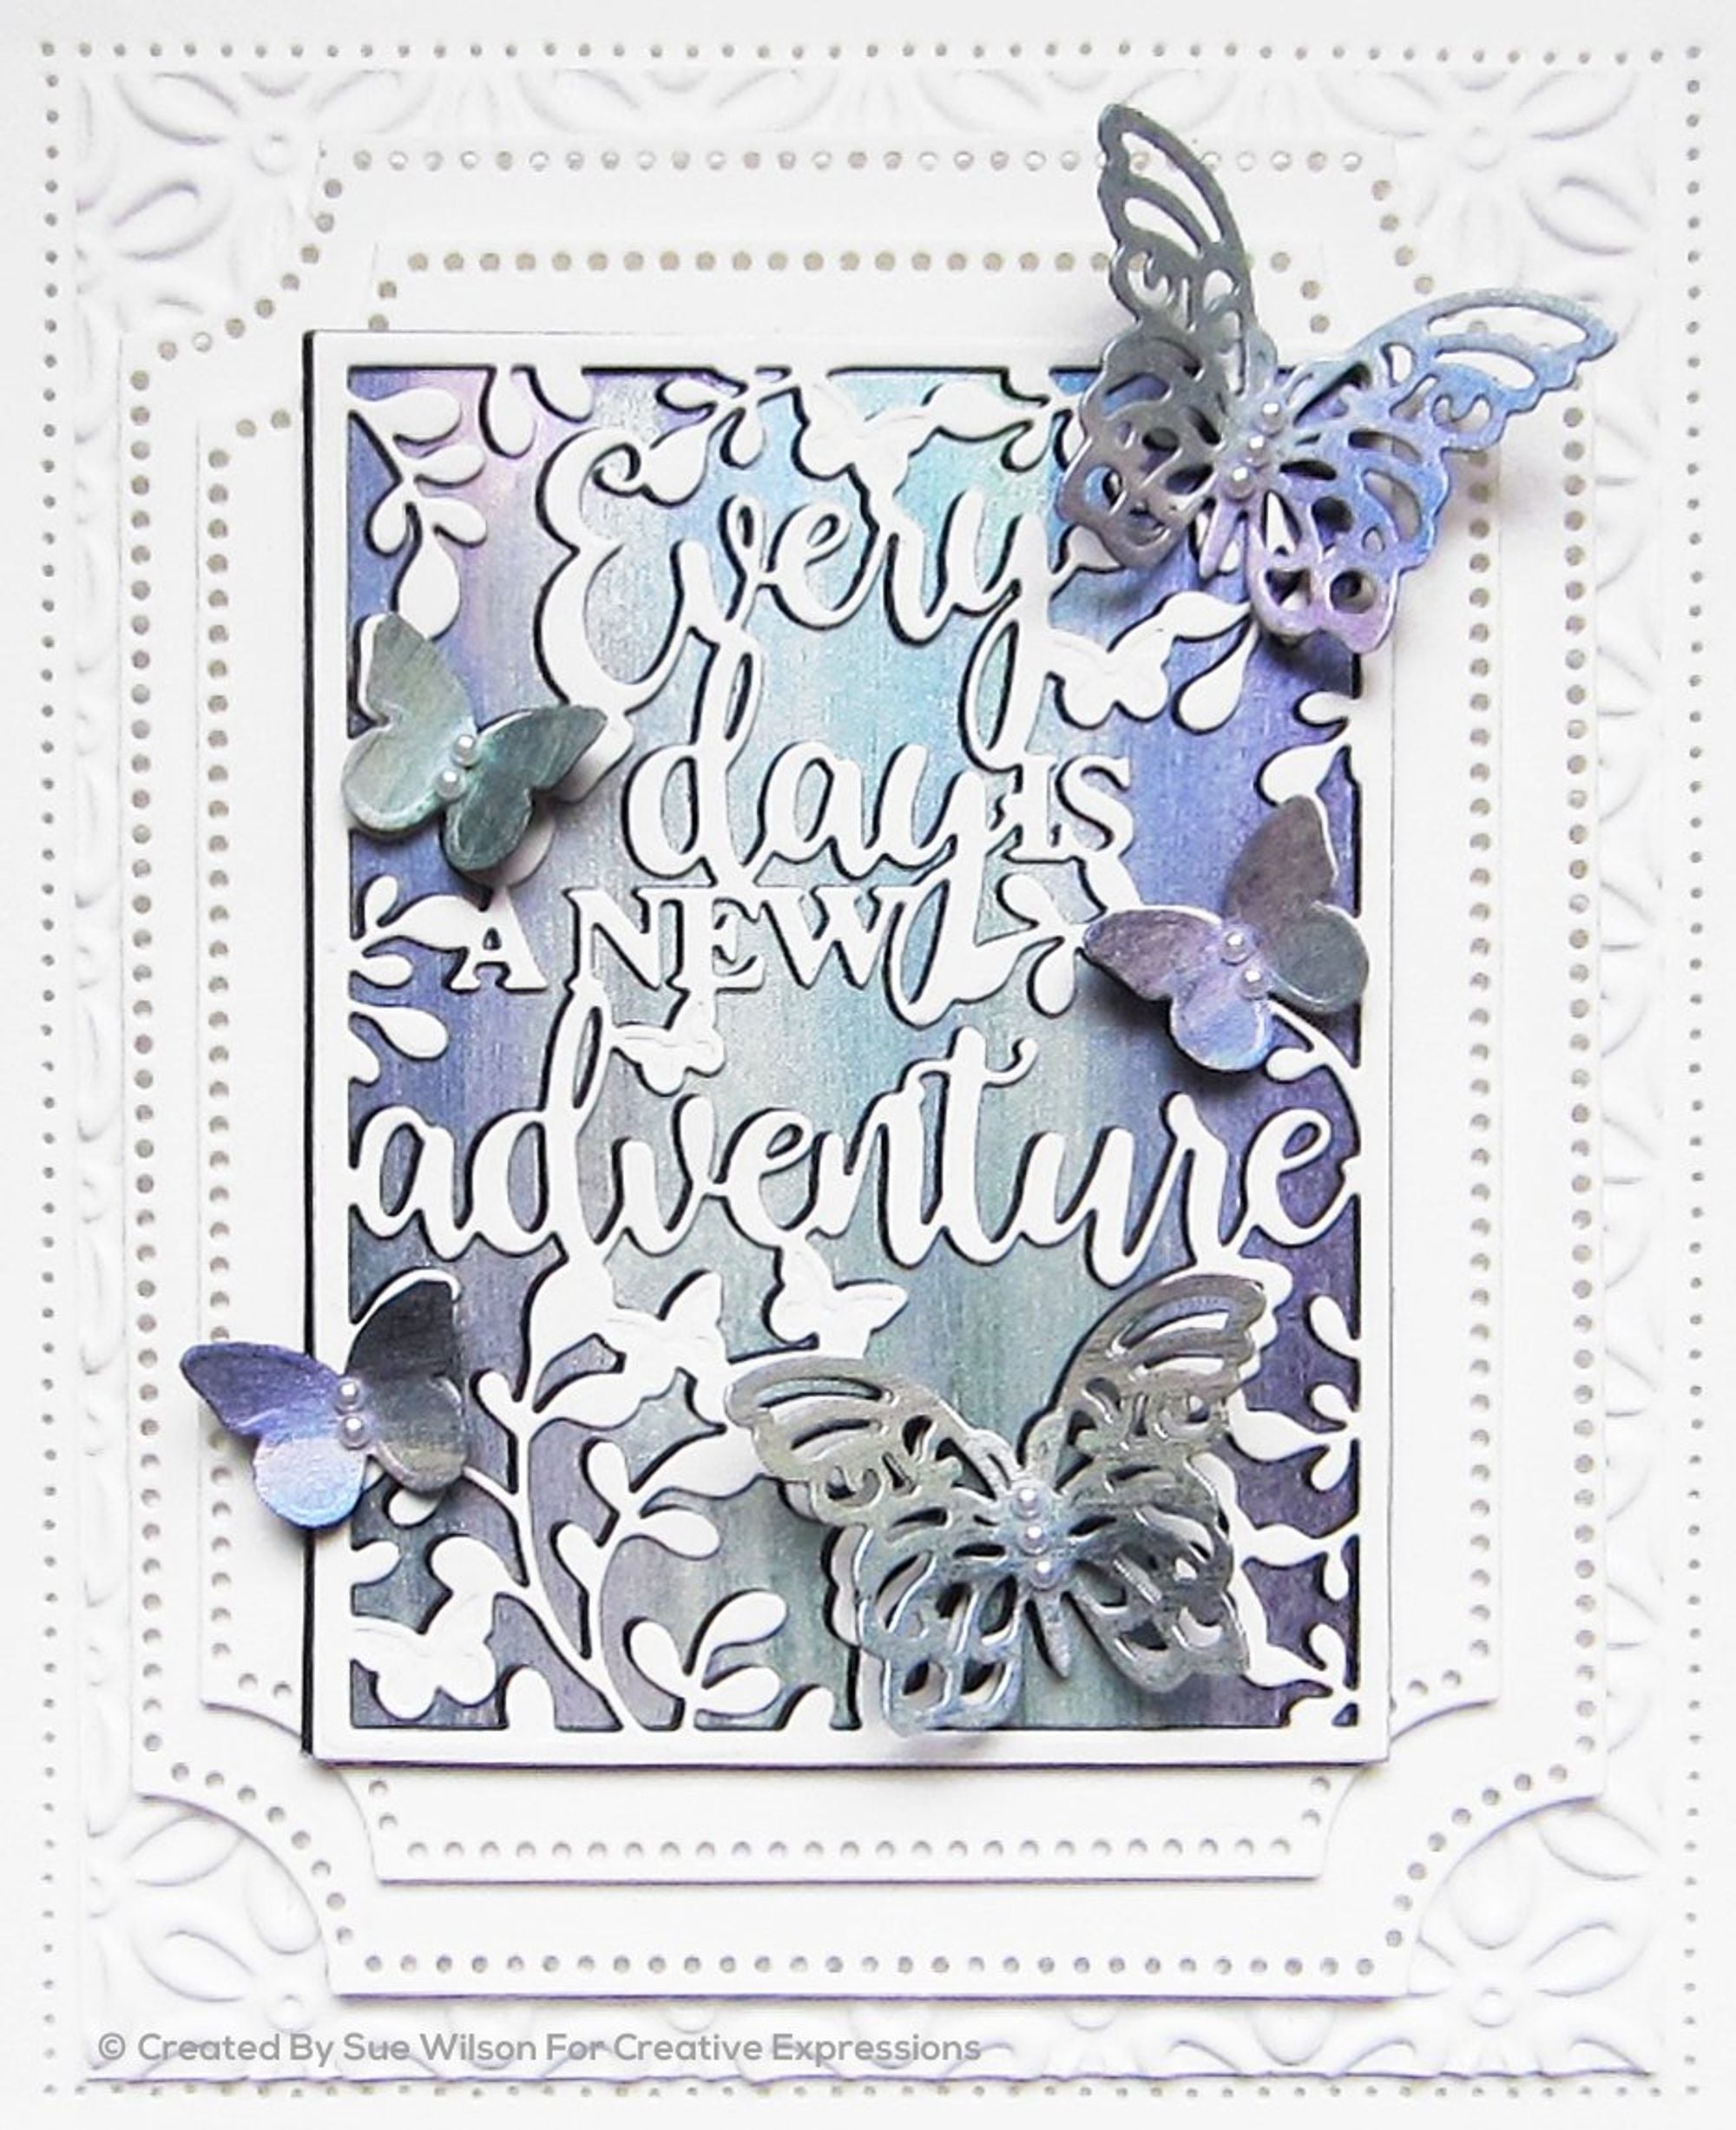 Sue Wilson  All In One Every Day Is A New Adventure Craft Die